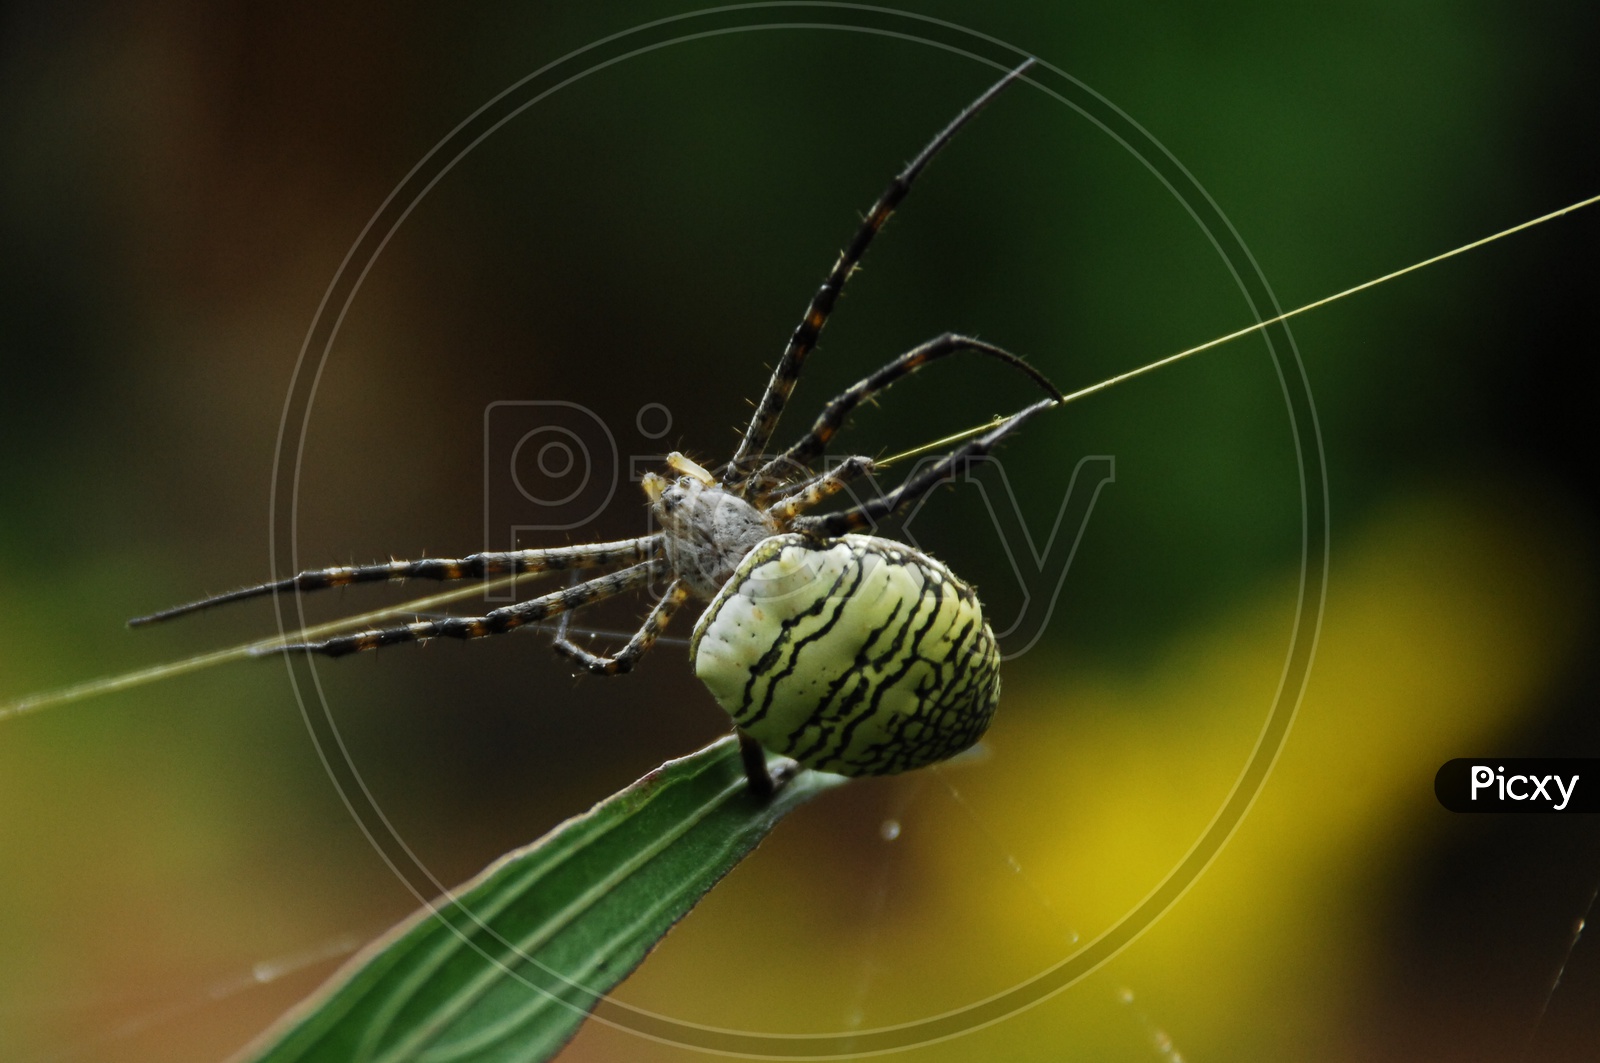 A Spider on the plant leaf